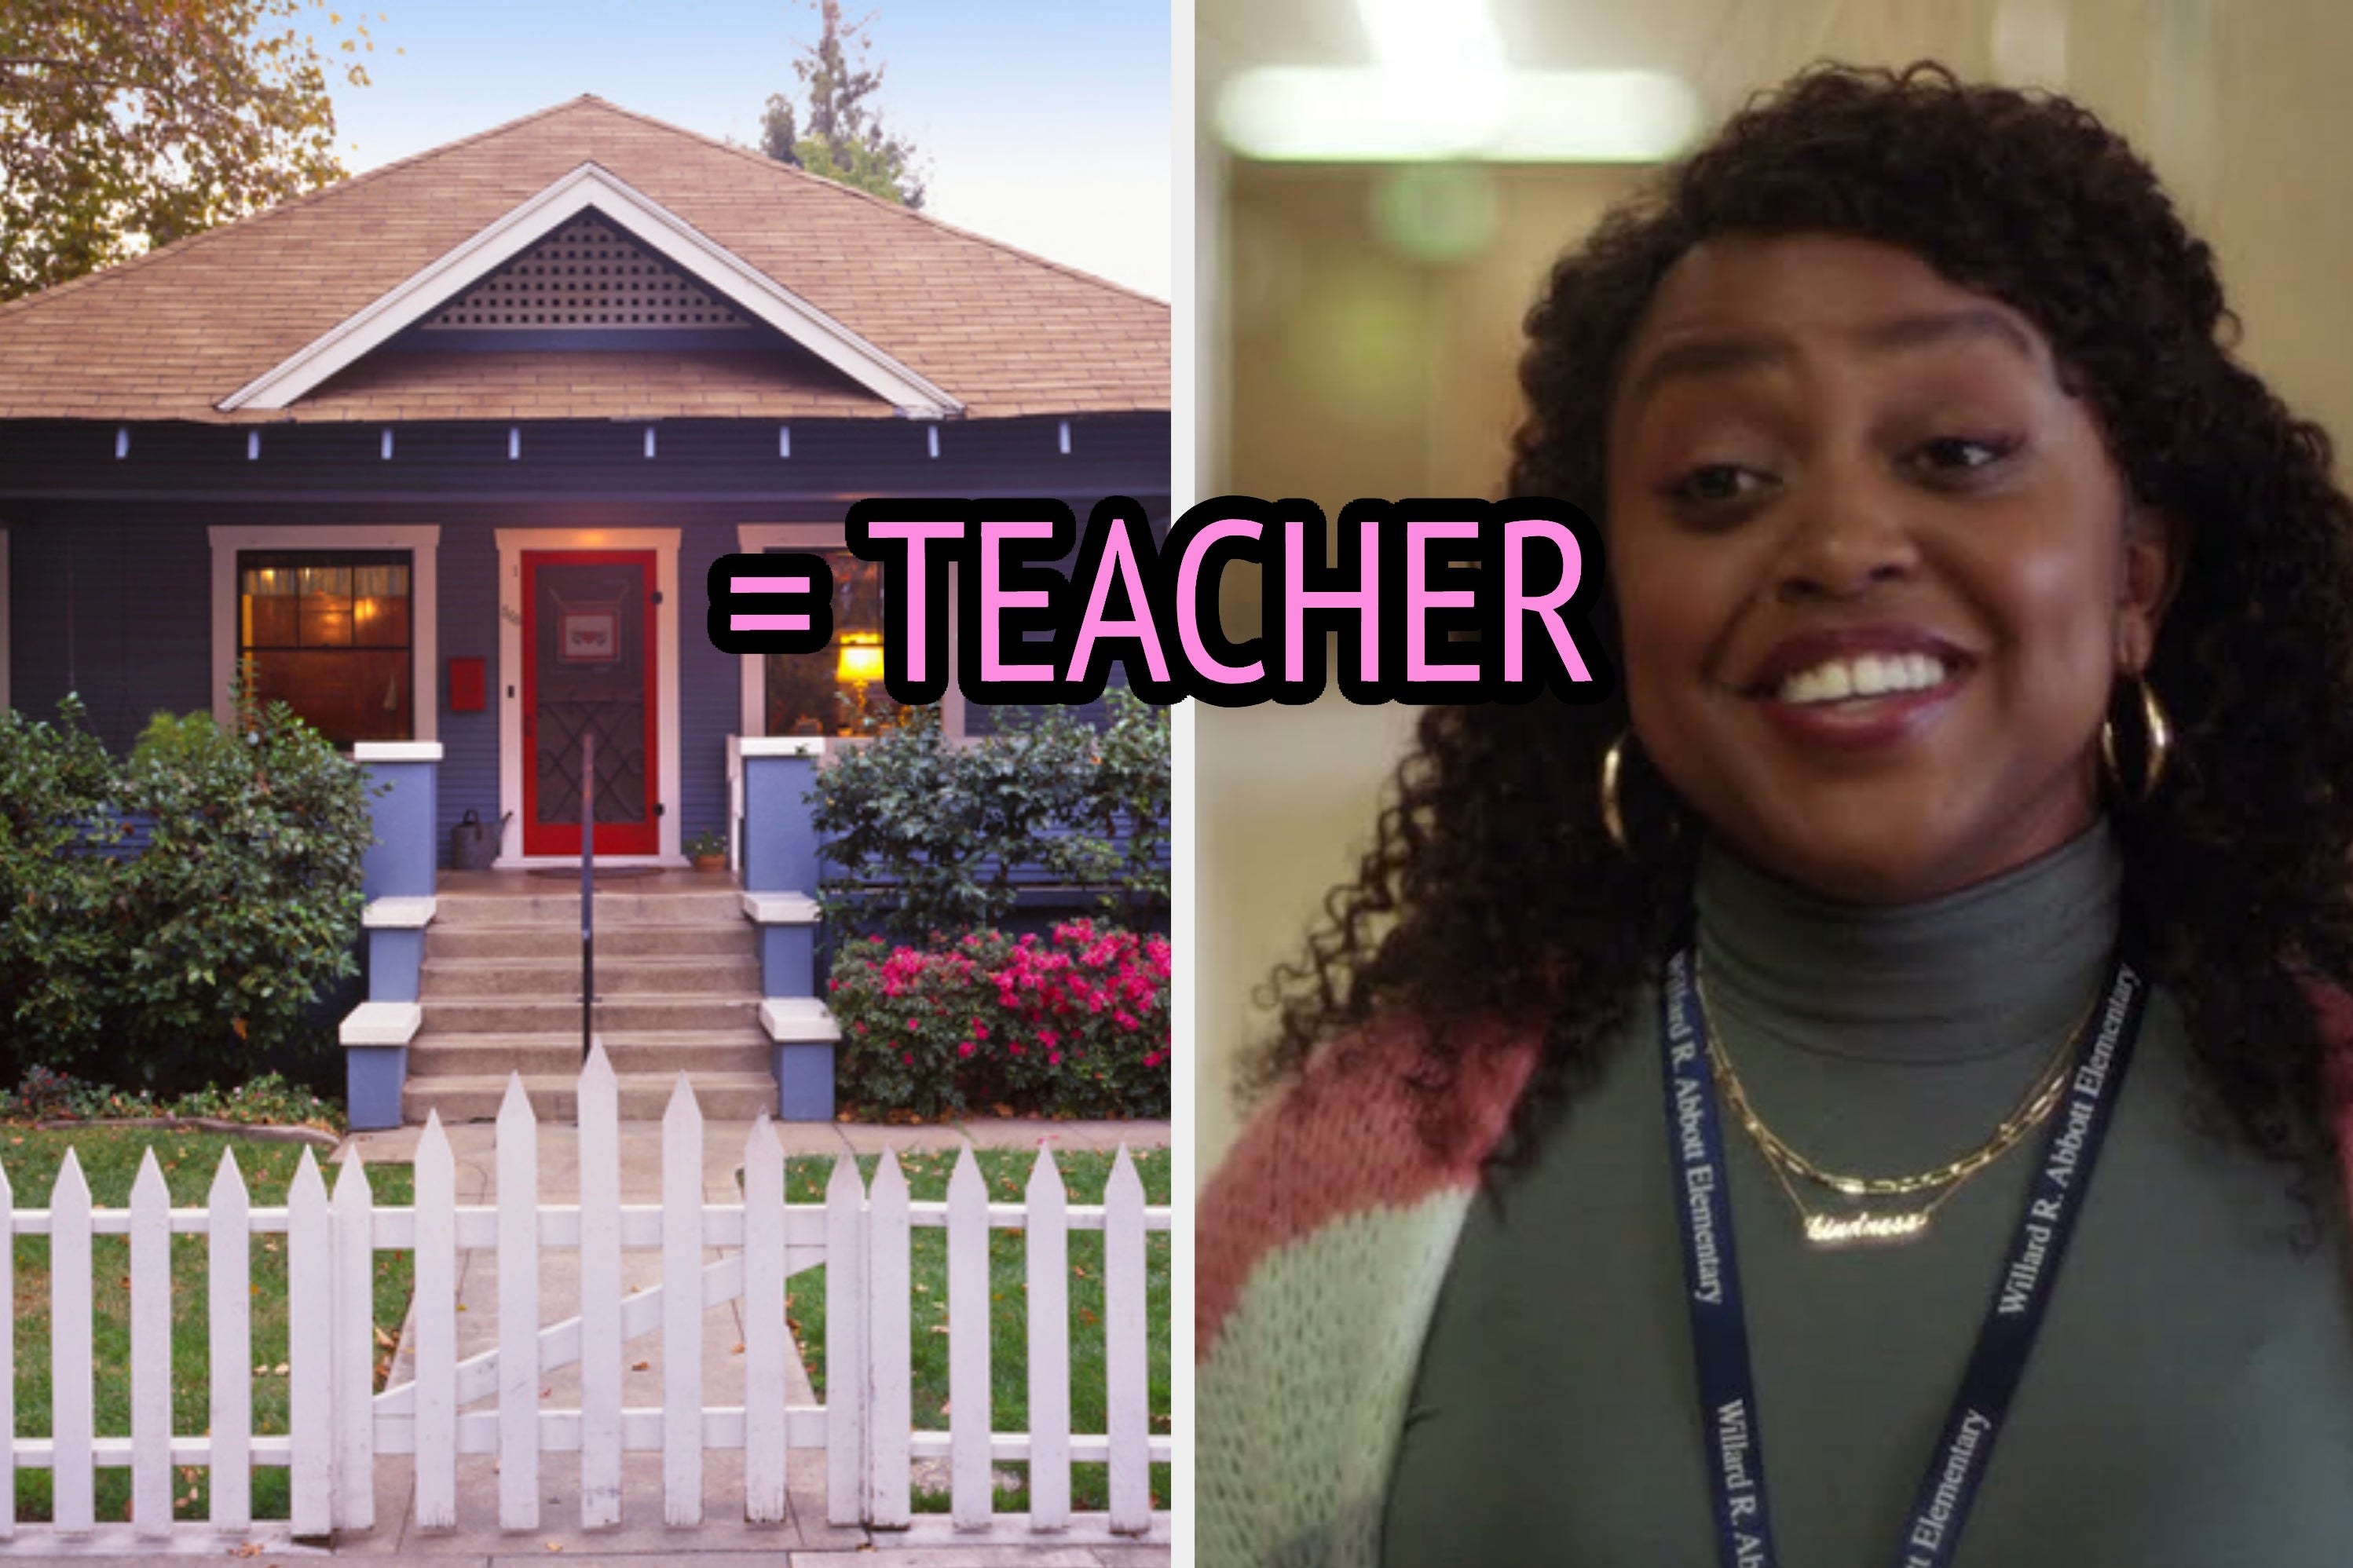 On the left, a bungalow home with a picket fence out front, and on the right, Quinta Brunson as Janine on Abbott Elementary with equals teacher typed in the middle